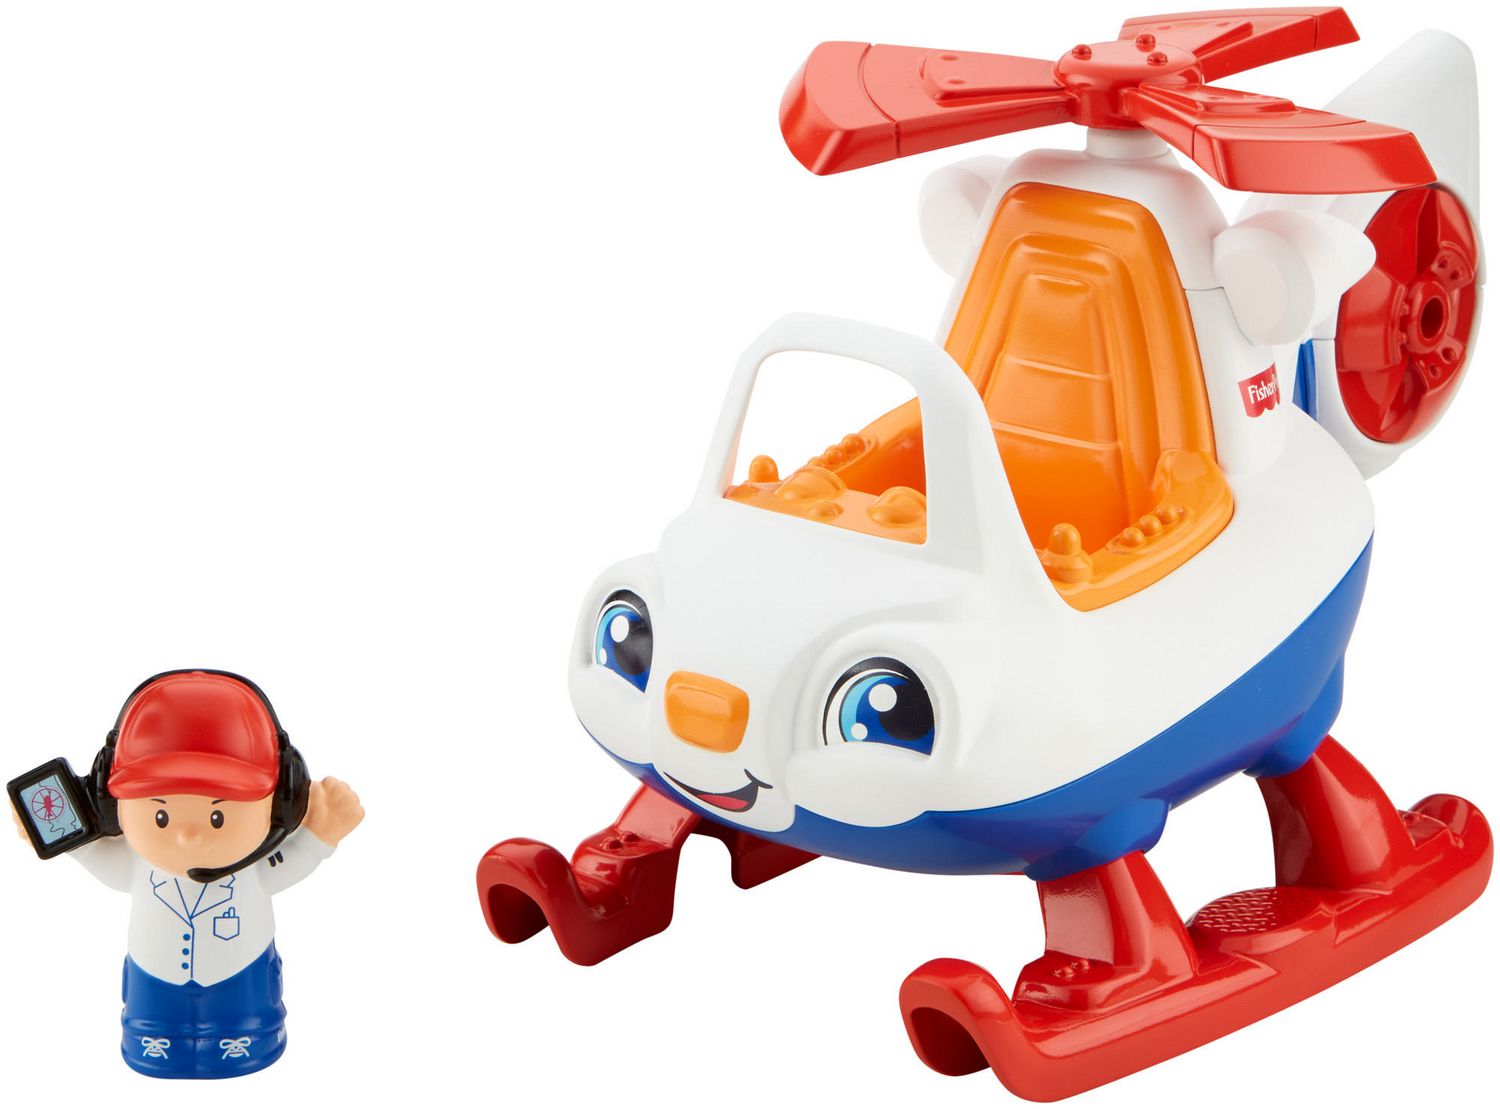 Fisher 2008 Little People Talking Helicopter Vehicle Pilot Boy Works 2pc for sale online 